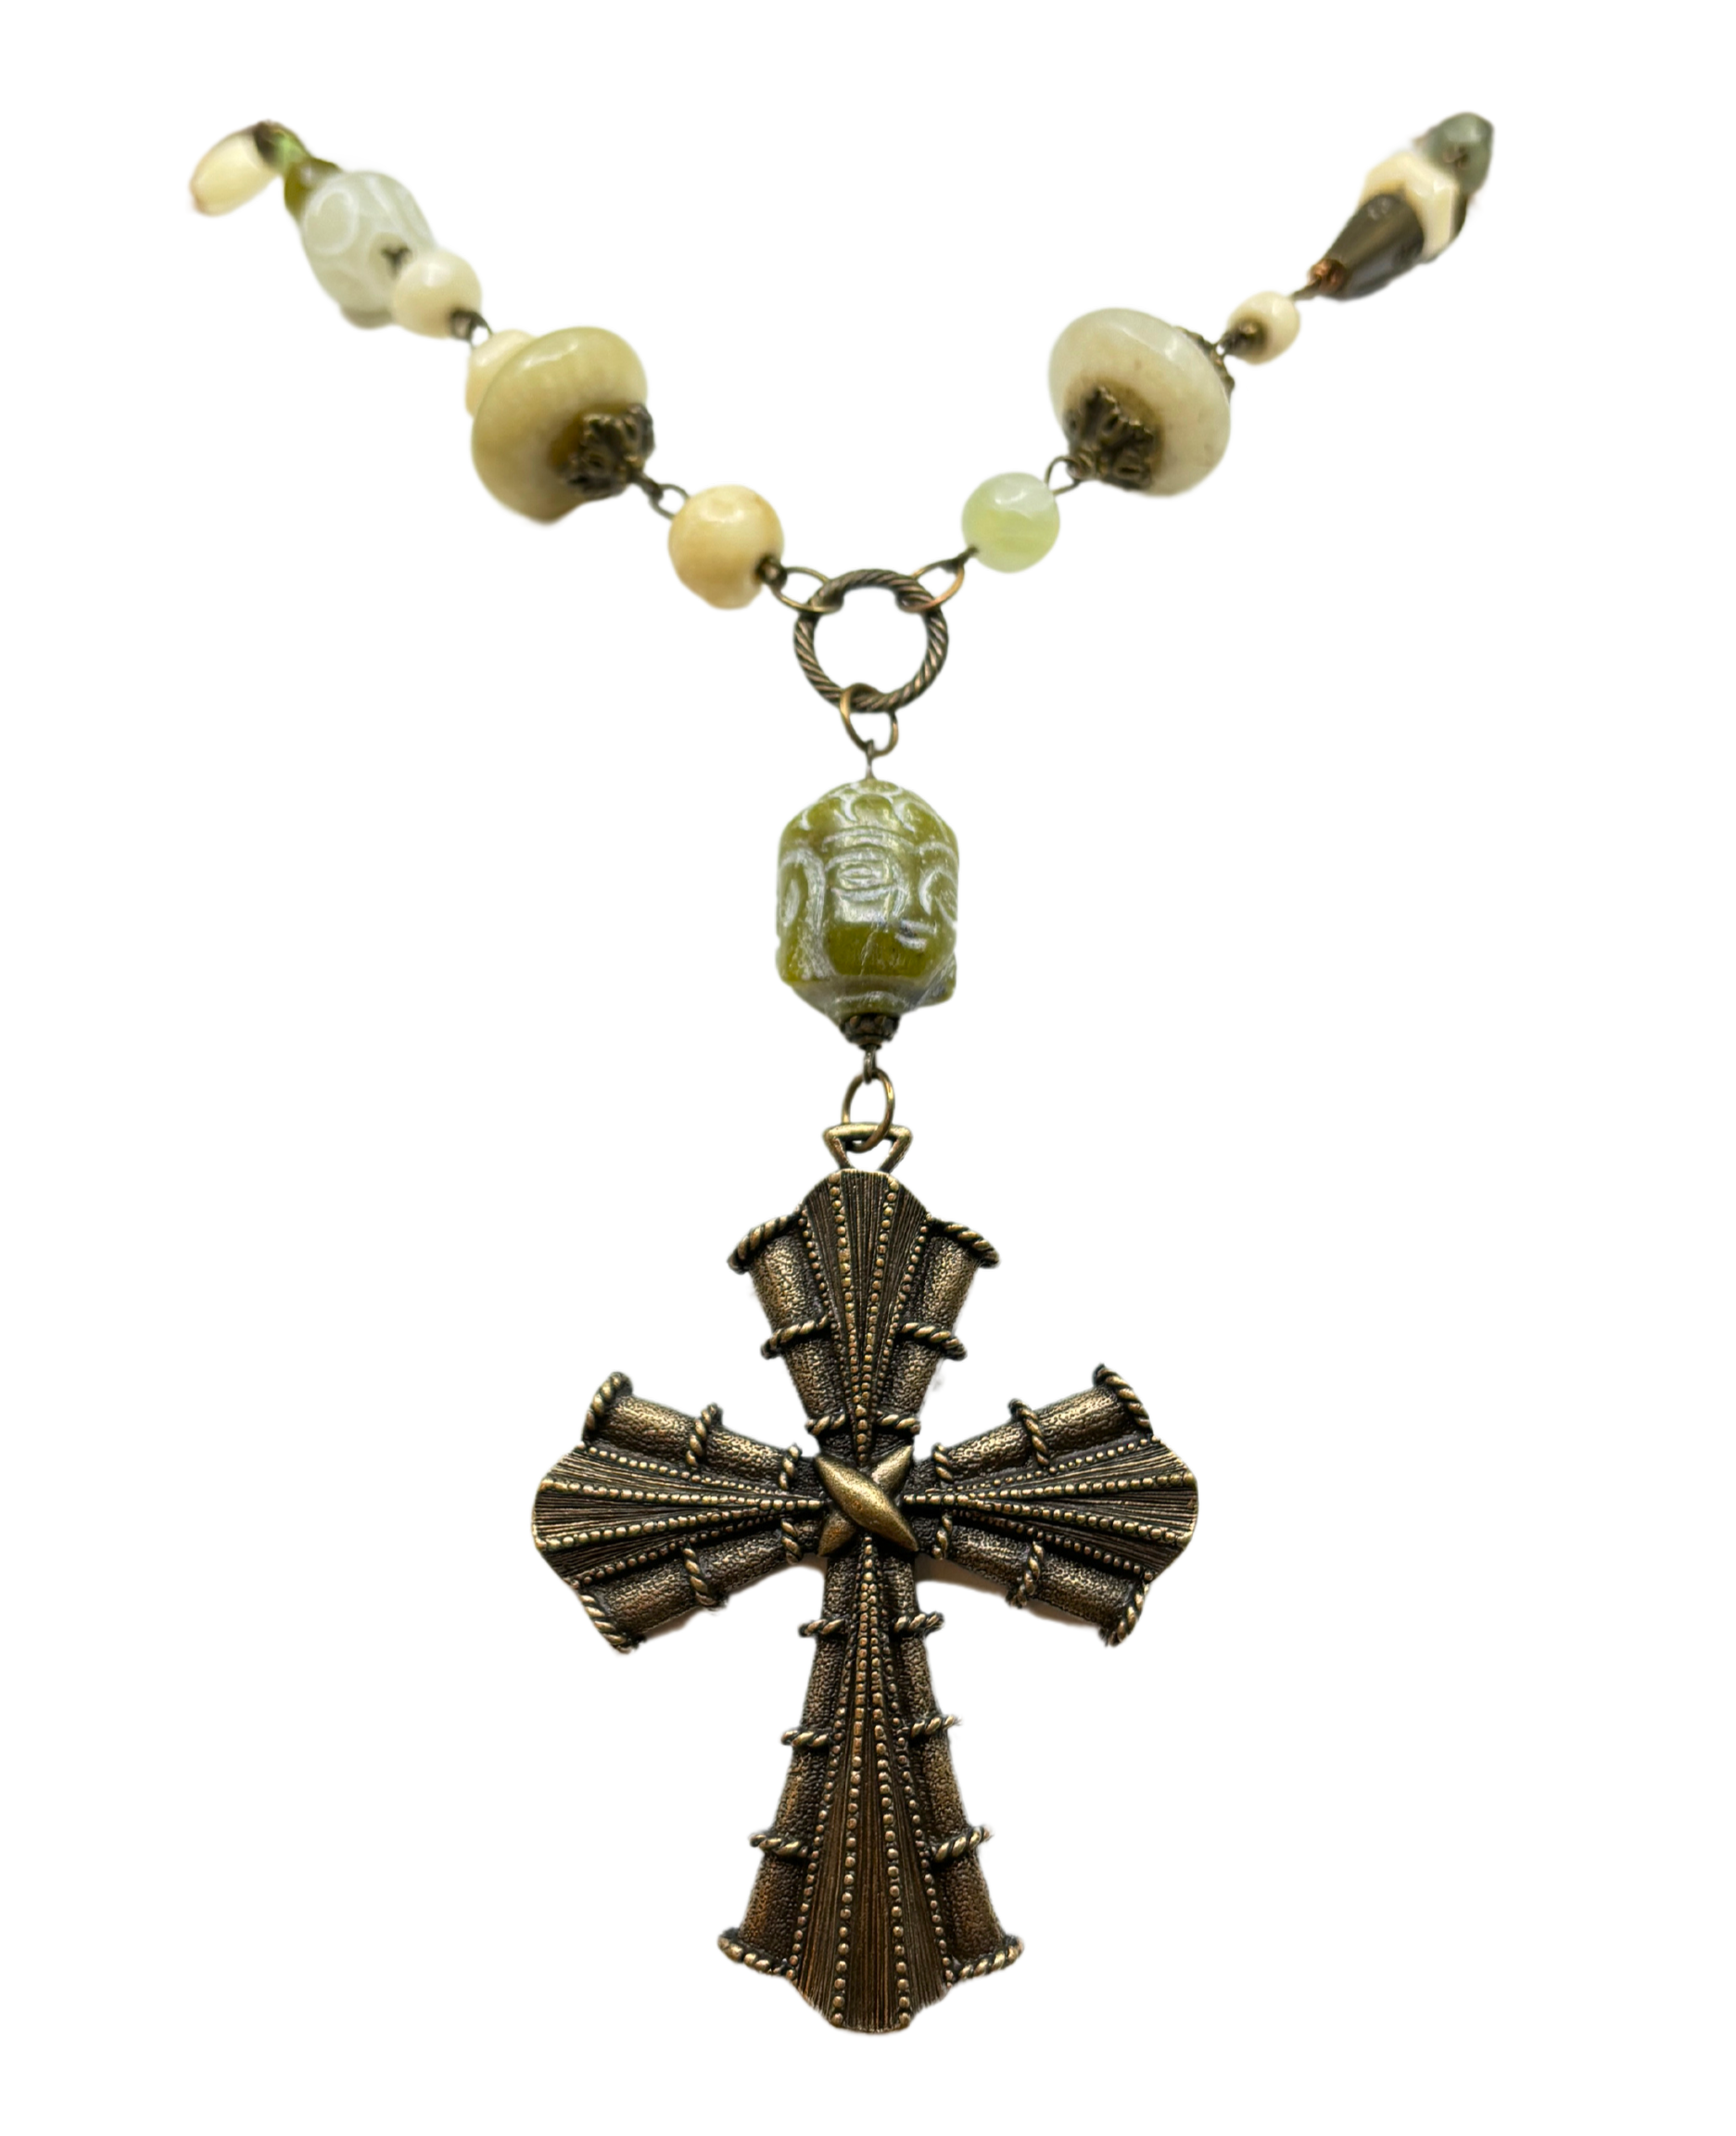 Vintage Green Handmade Rosary Chain Necklace